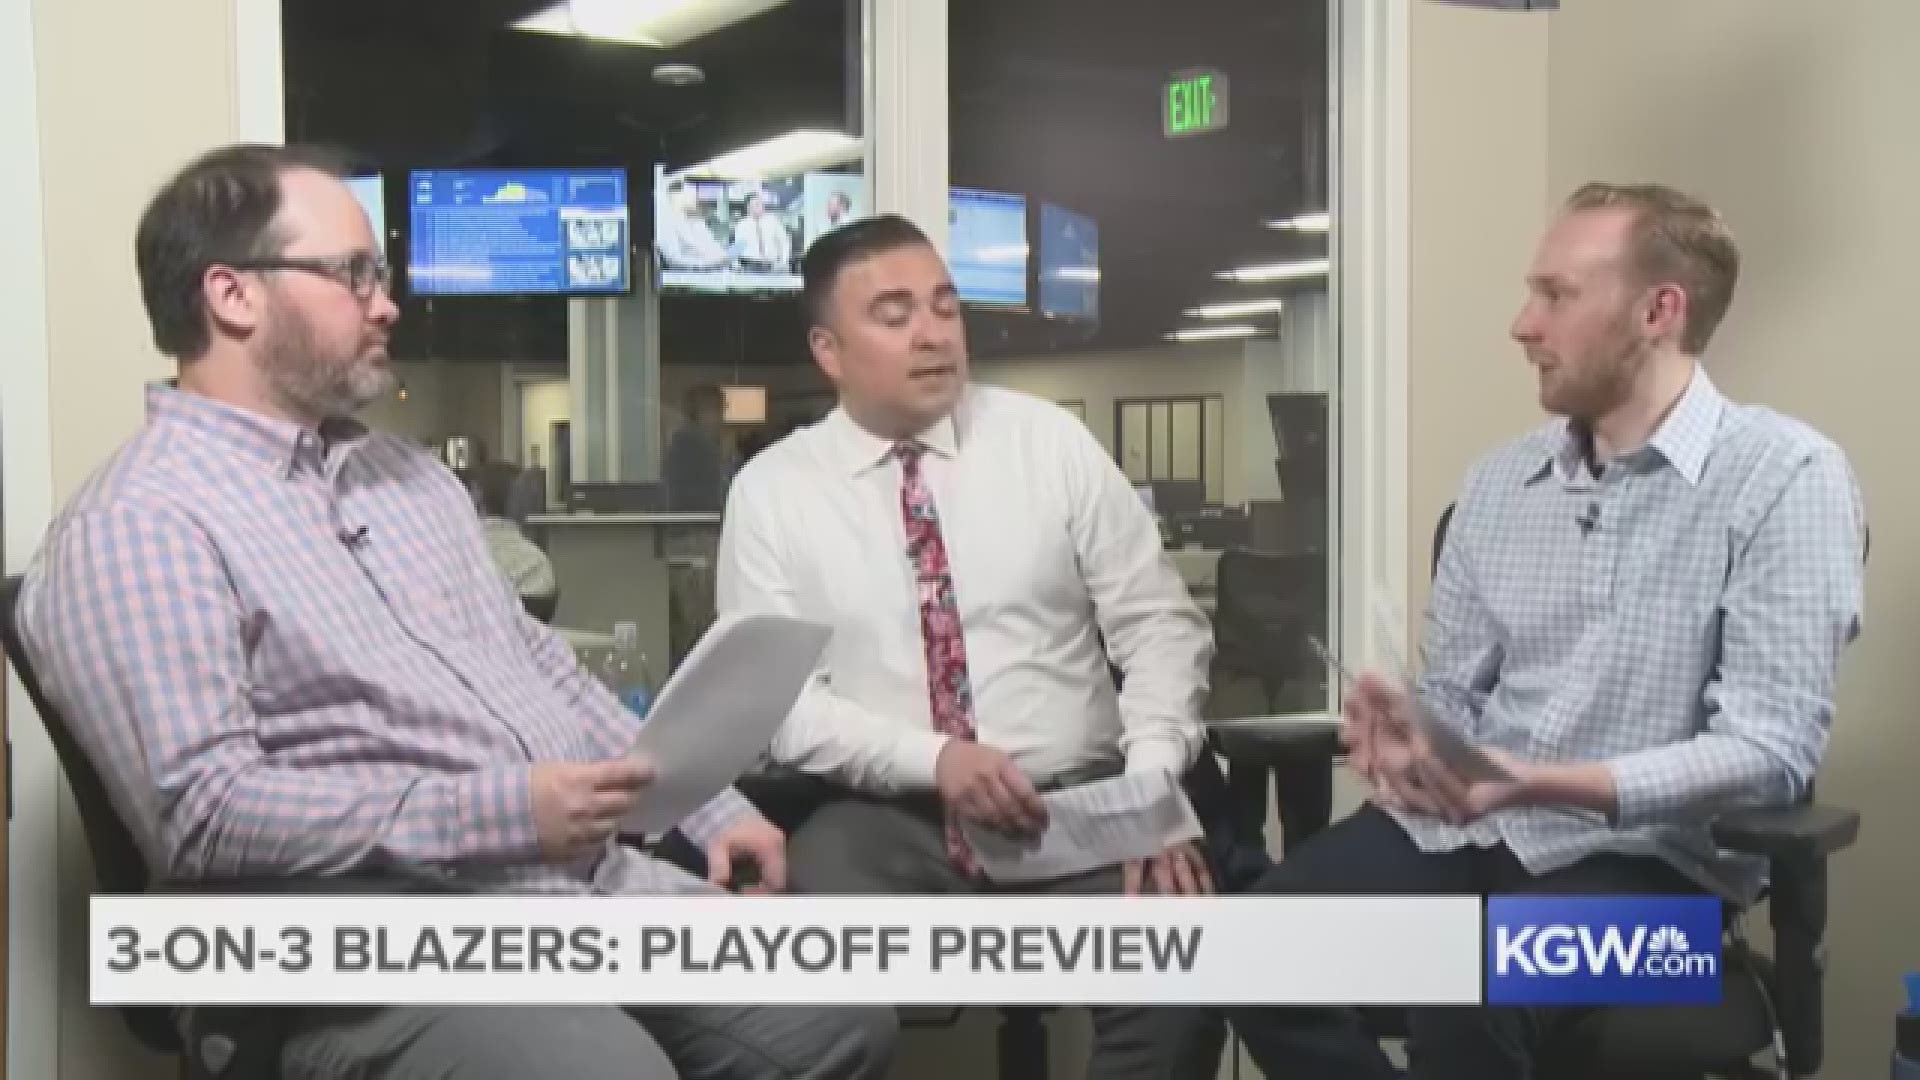 KGW's Jared Cowley, Orlando Sanchez and Nate Hanson predict the outcome of the first-round NBA playoff series between the Trail Blazers and Pelicans.